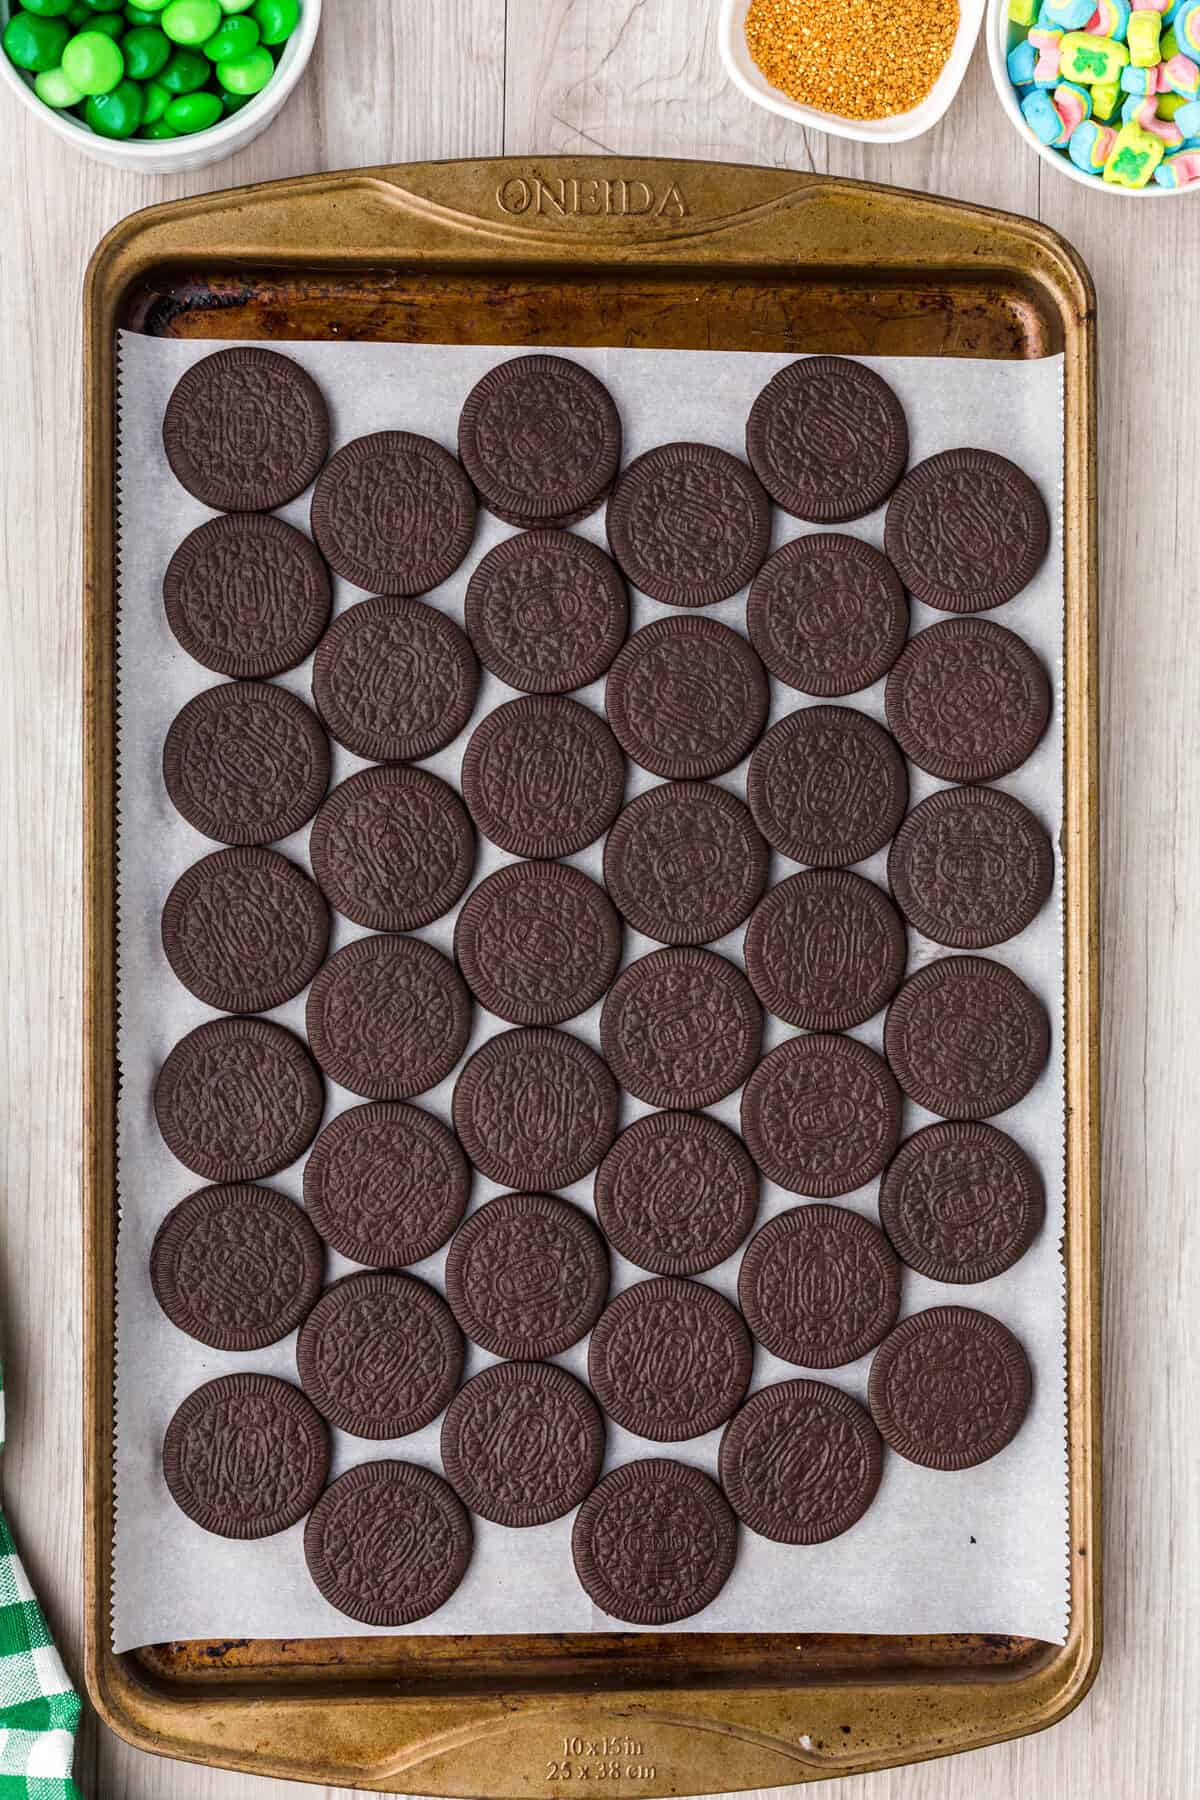 Line a baking sheet with parchment paper & line oreos up in a single layer.